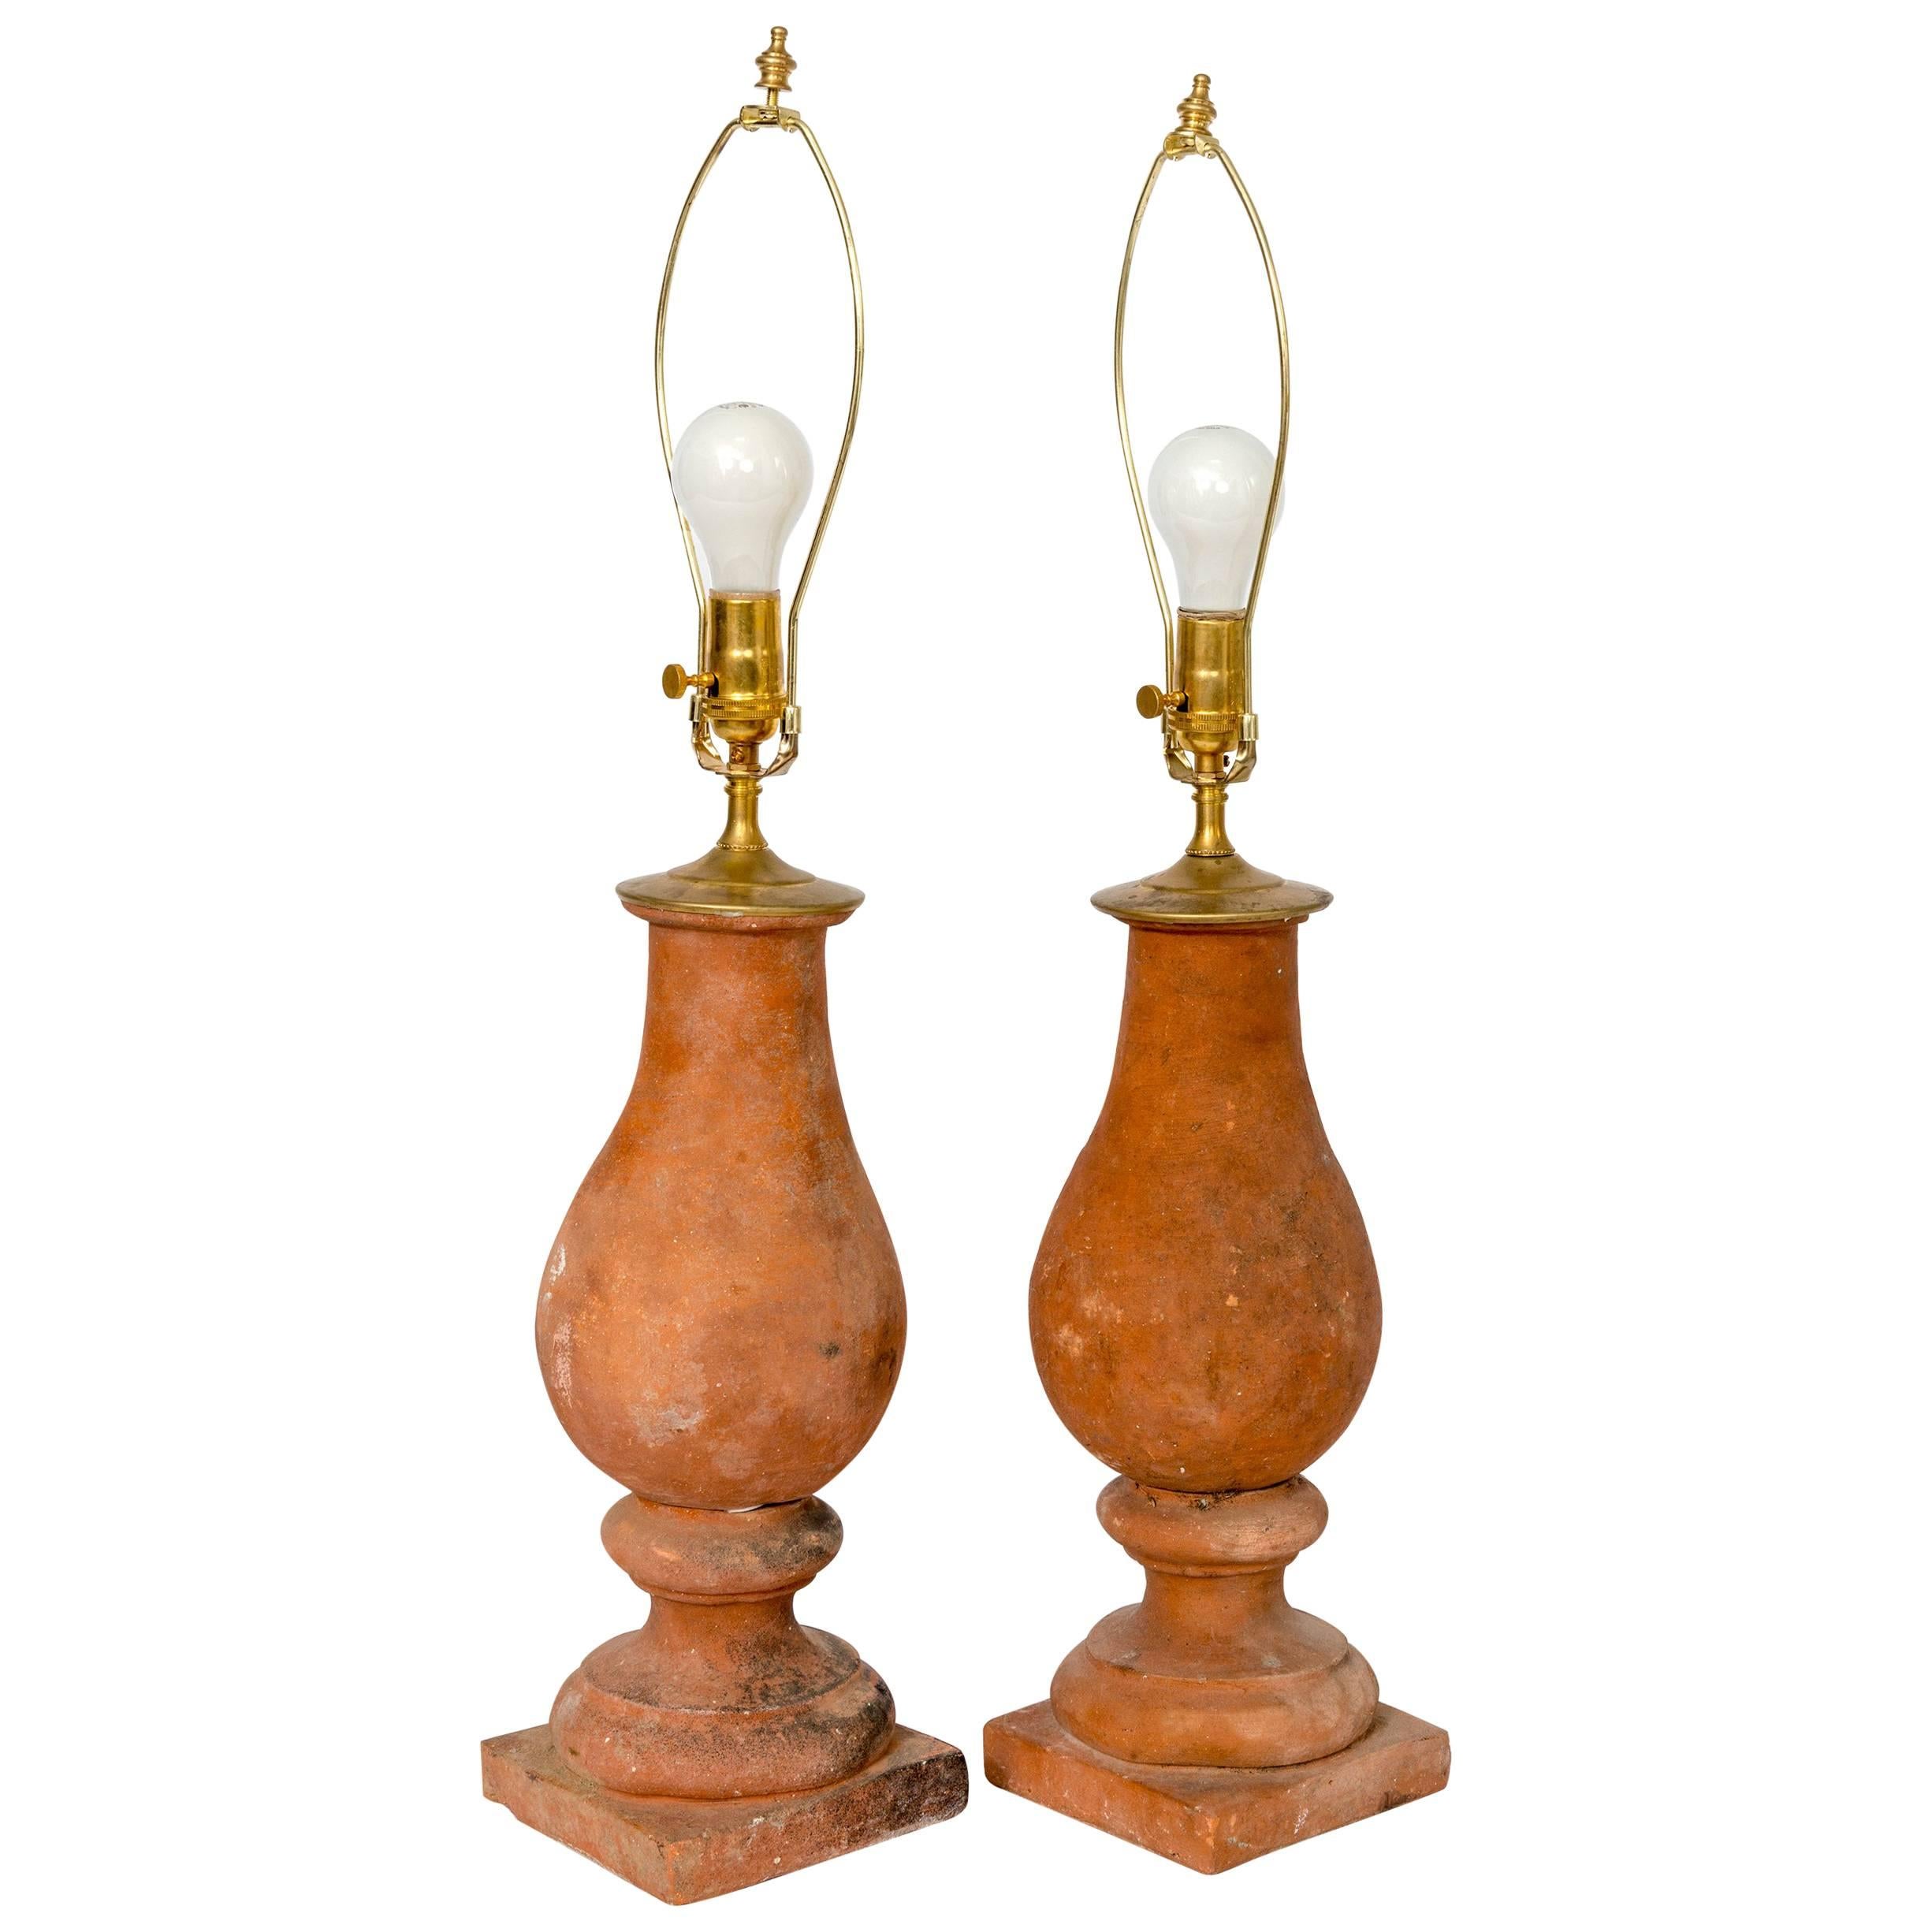 Pair of Hand-Mold Red Terra Cotta Baluster Table Lamps